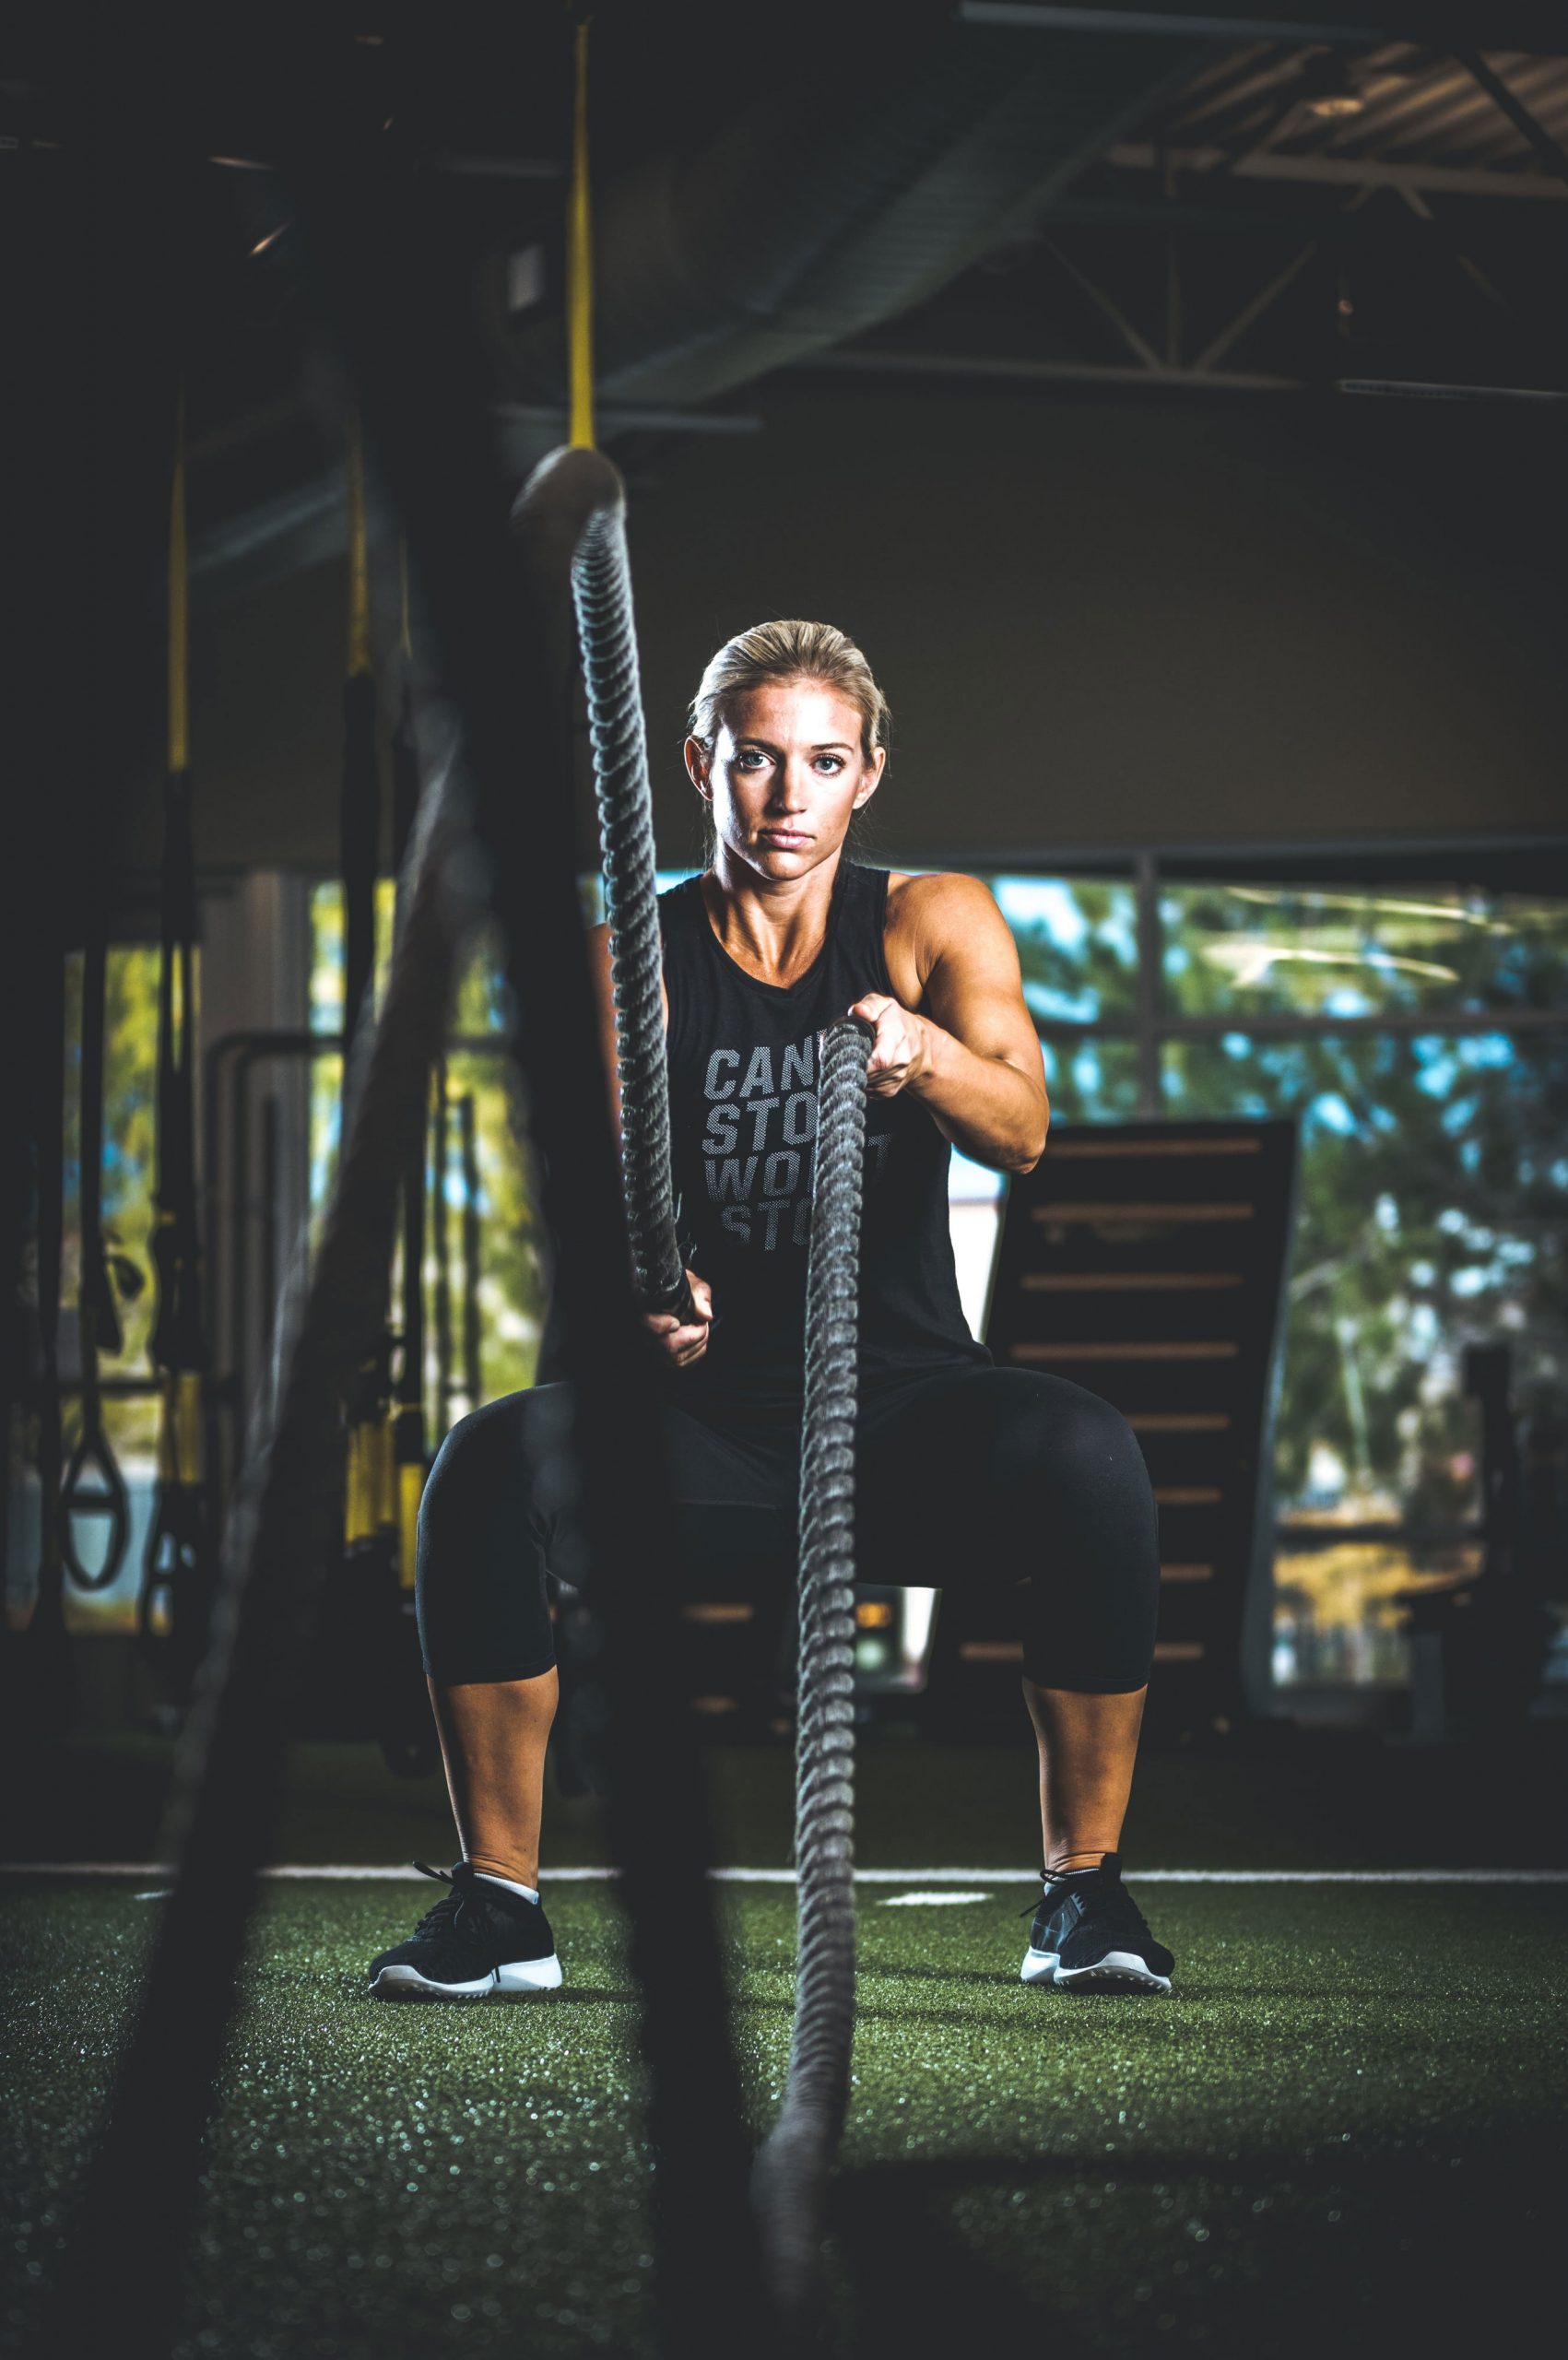 Wallpaper Woman Holding Rope On Gym, Exercise, Fit, Health, Bodybuilding, Sports